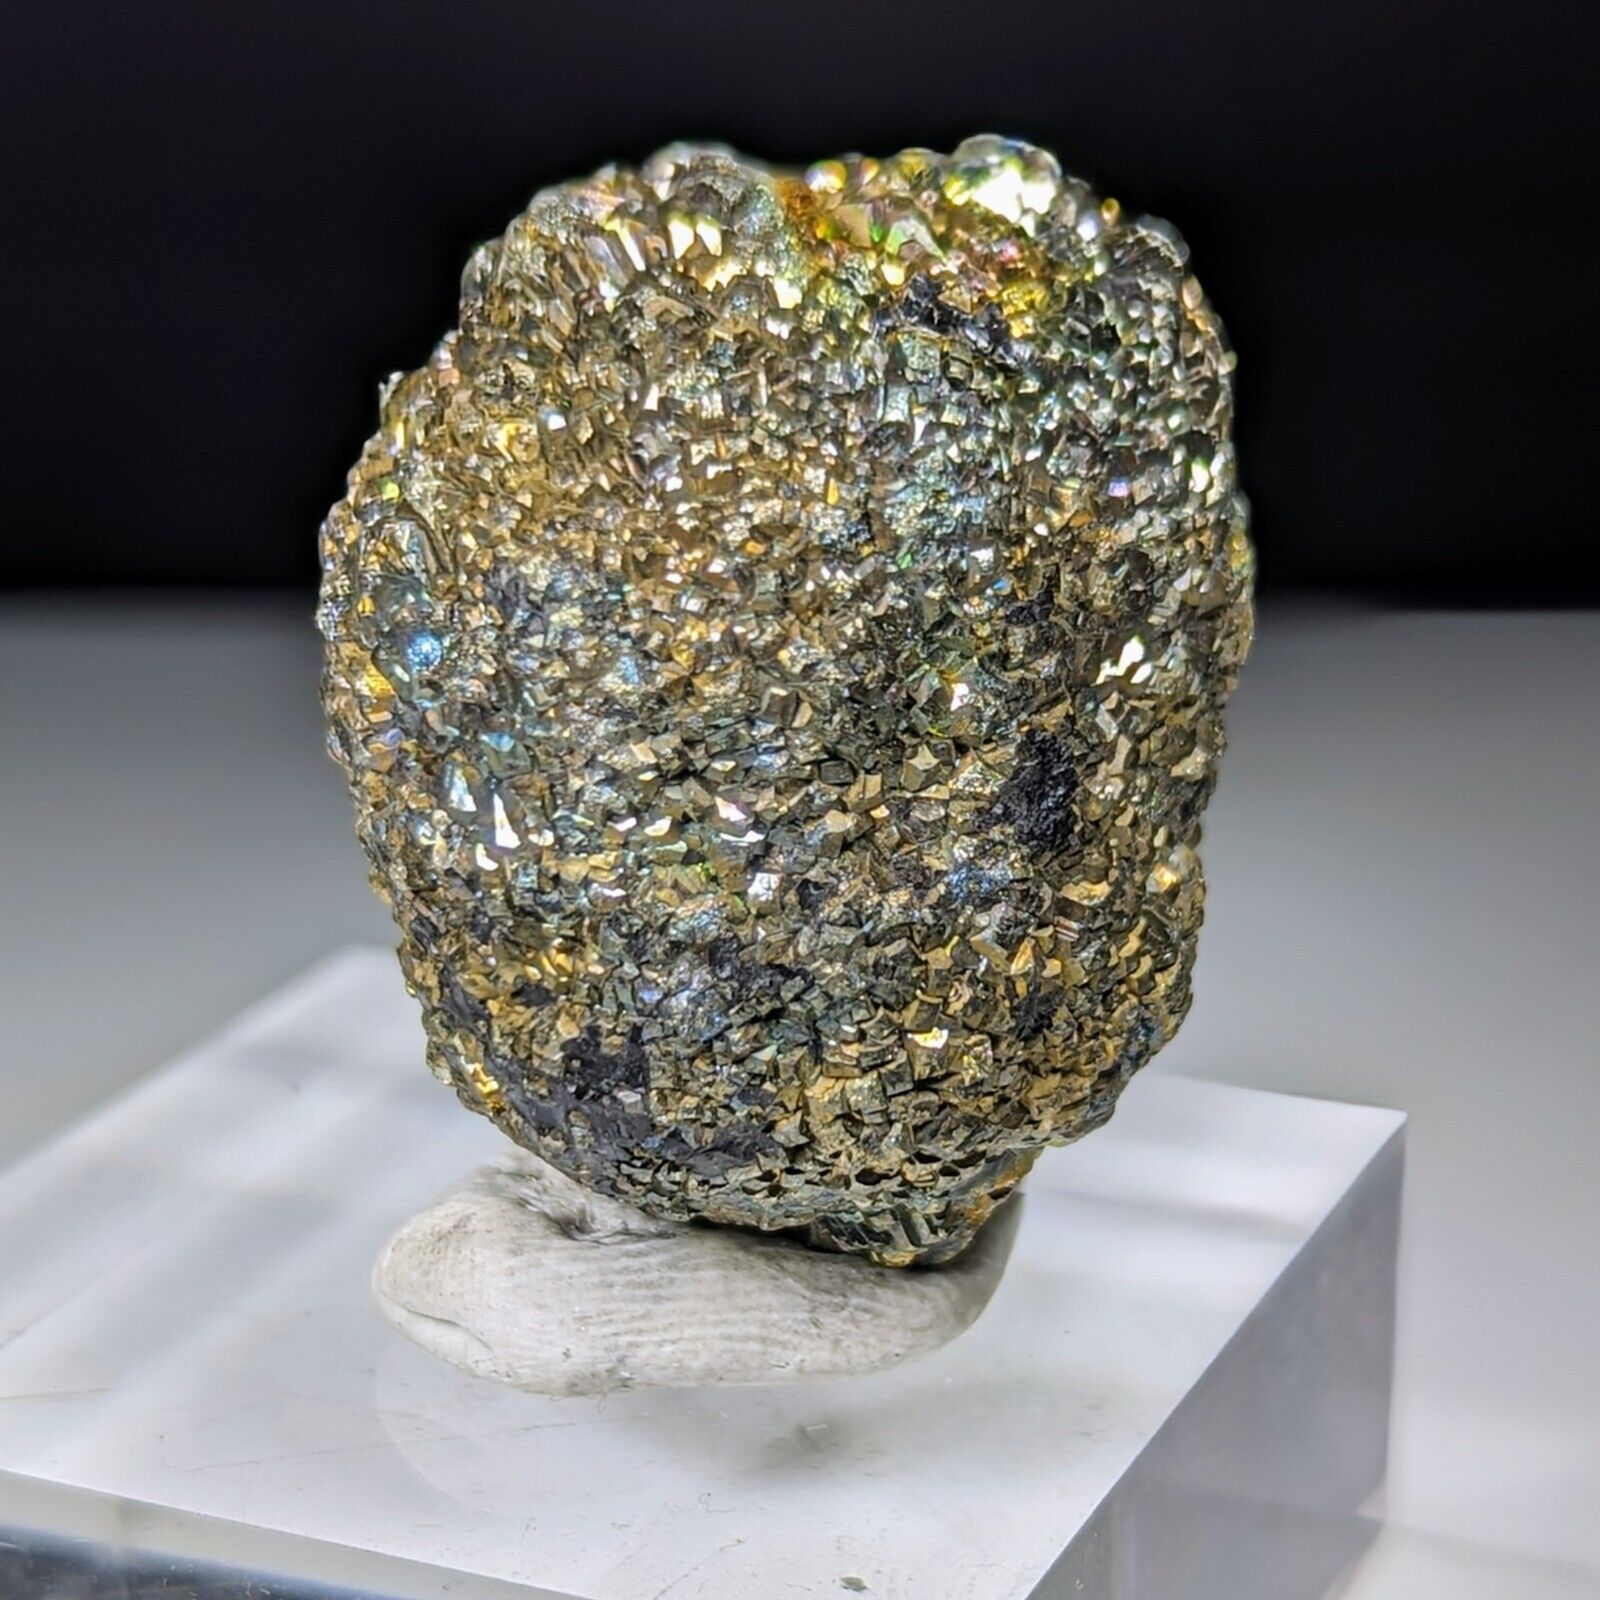 Natural Aesthetic Irredecent Golden Marcasite Var Pyrite Crystal With Rainbow